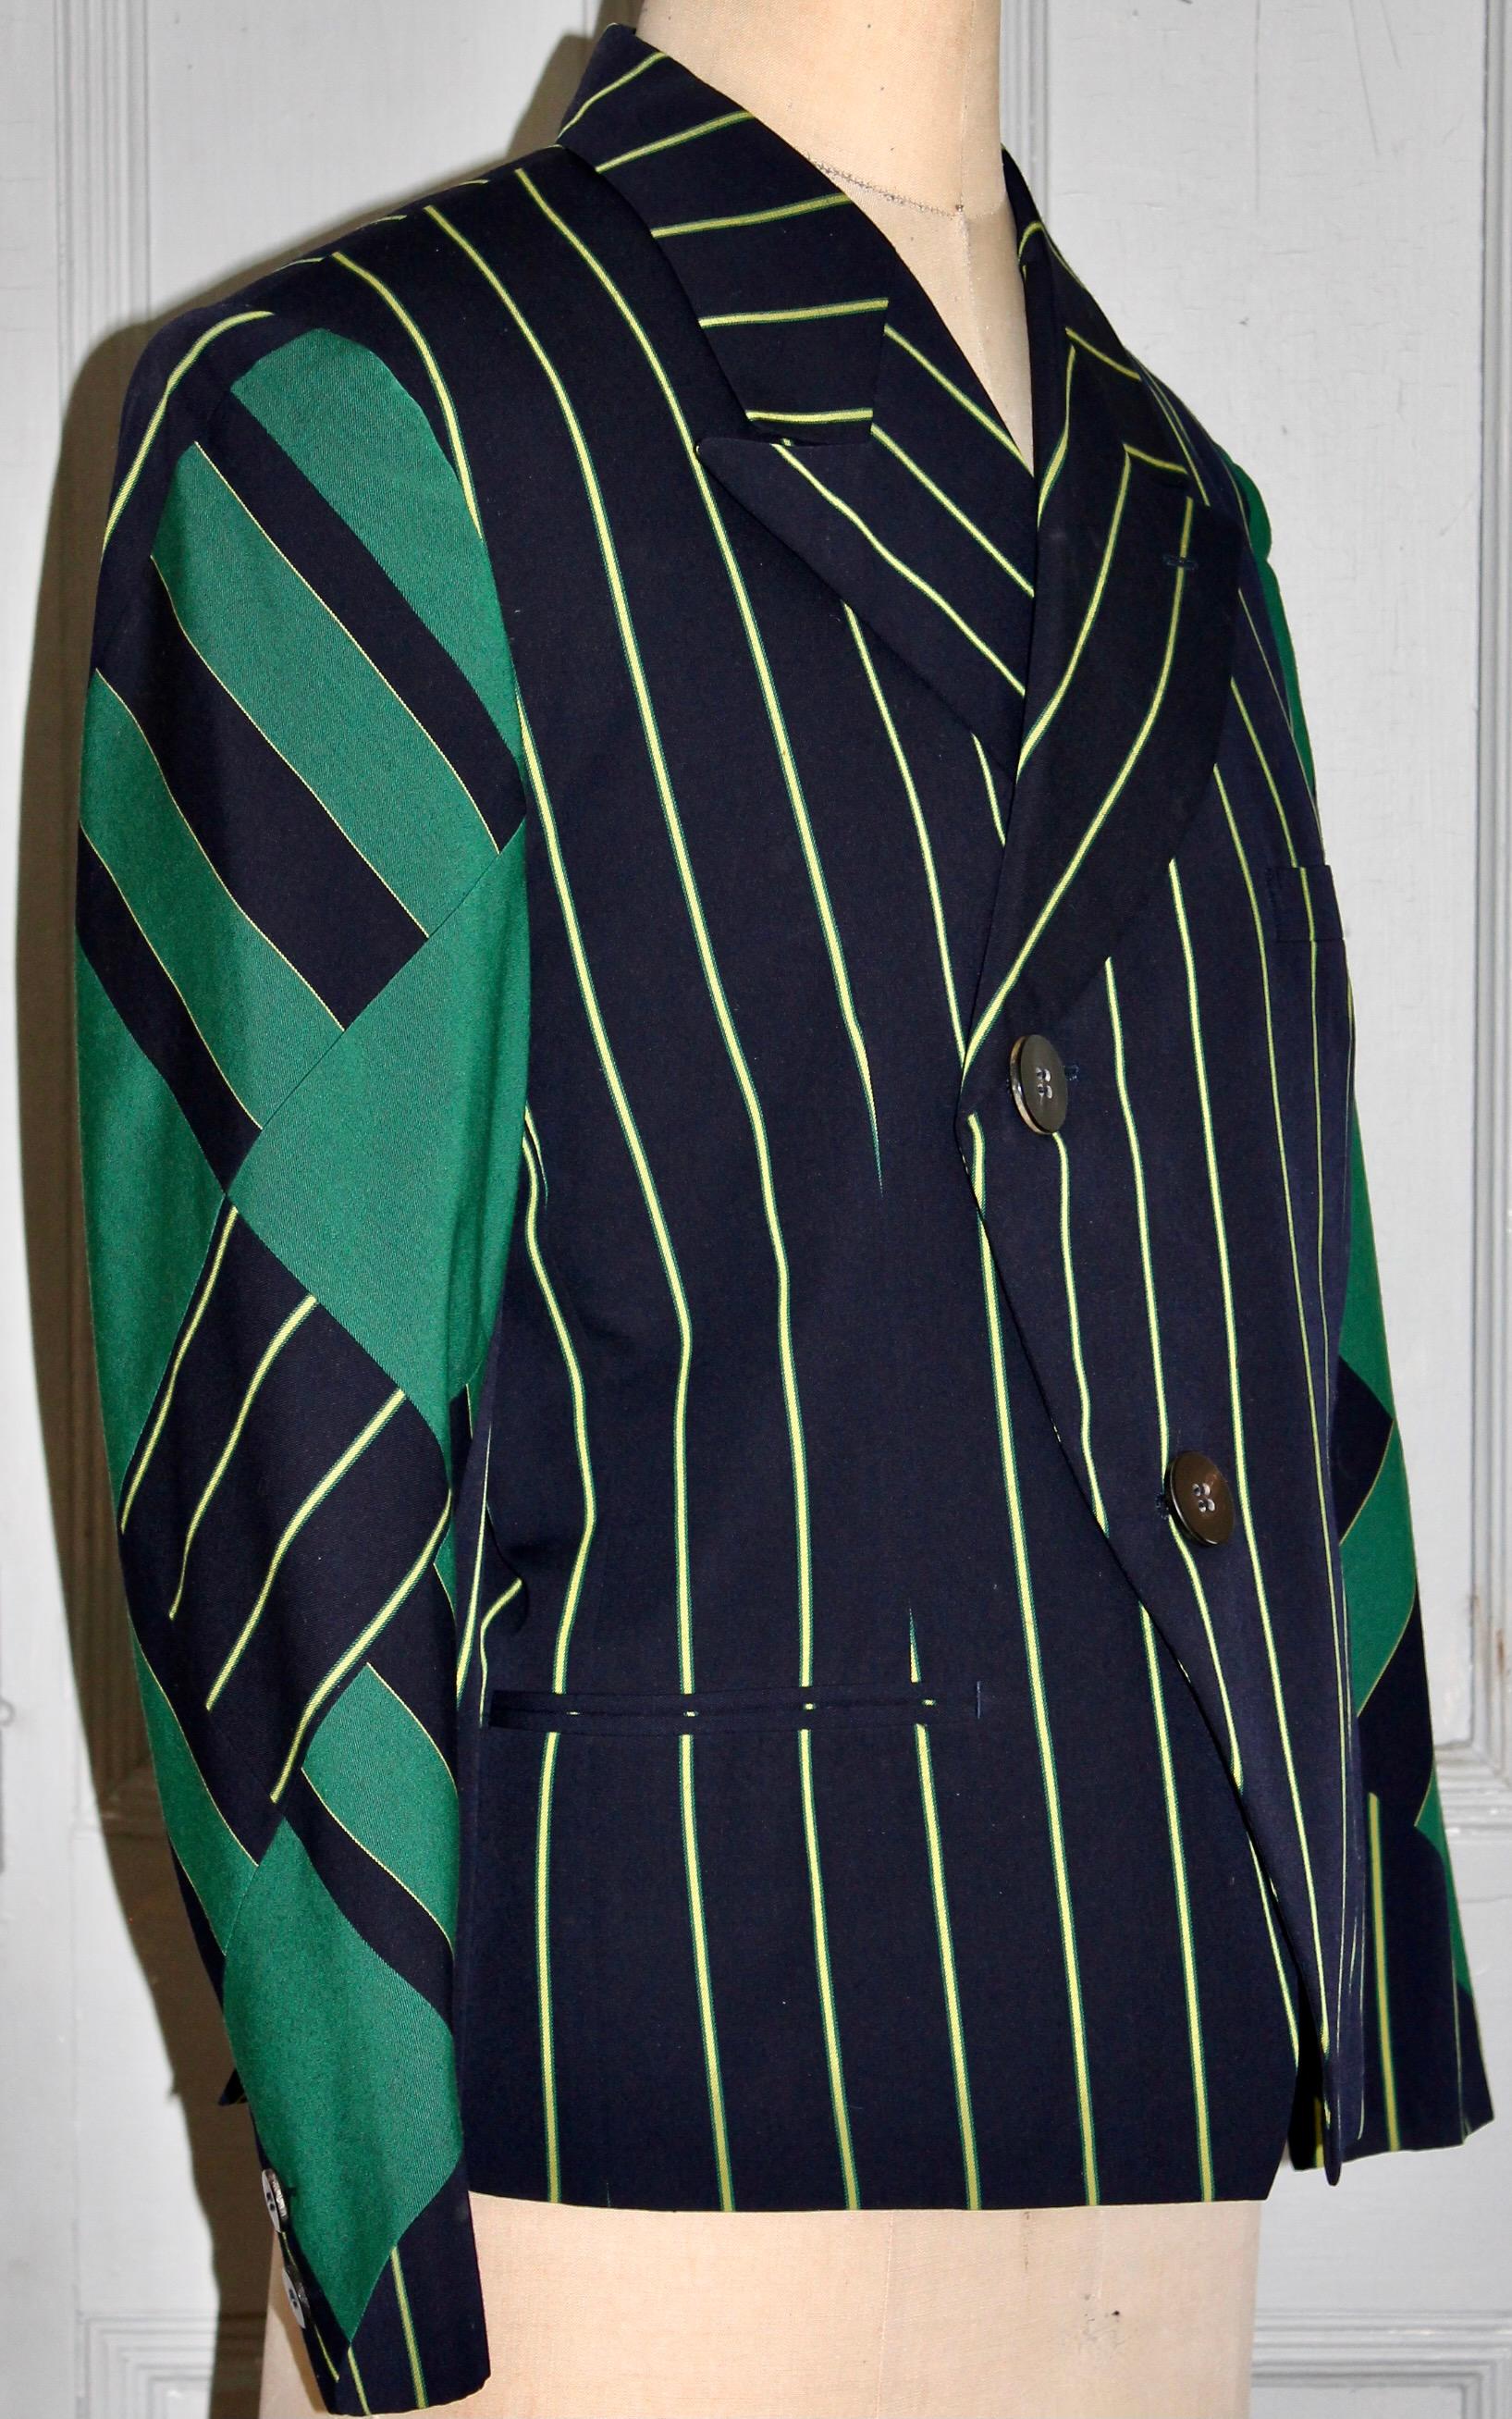 Issey Miyake Mens Jacket In Good Condition For Sale In Sharon, CT